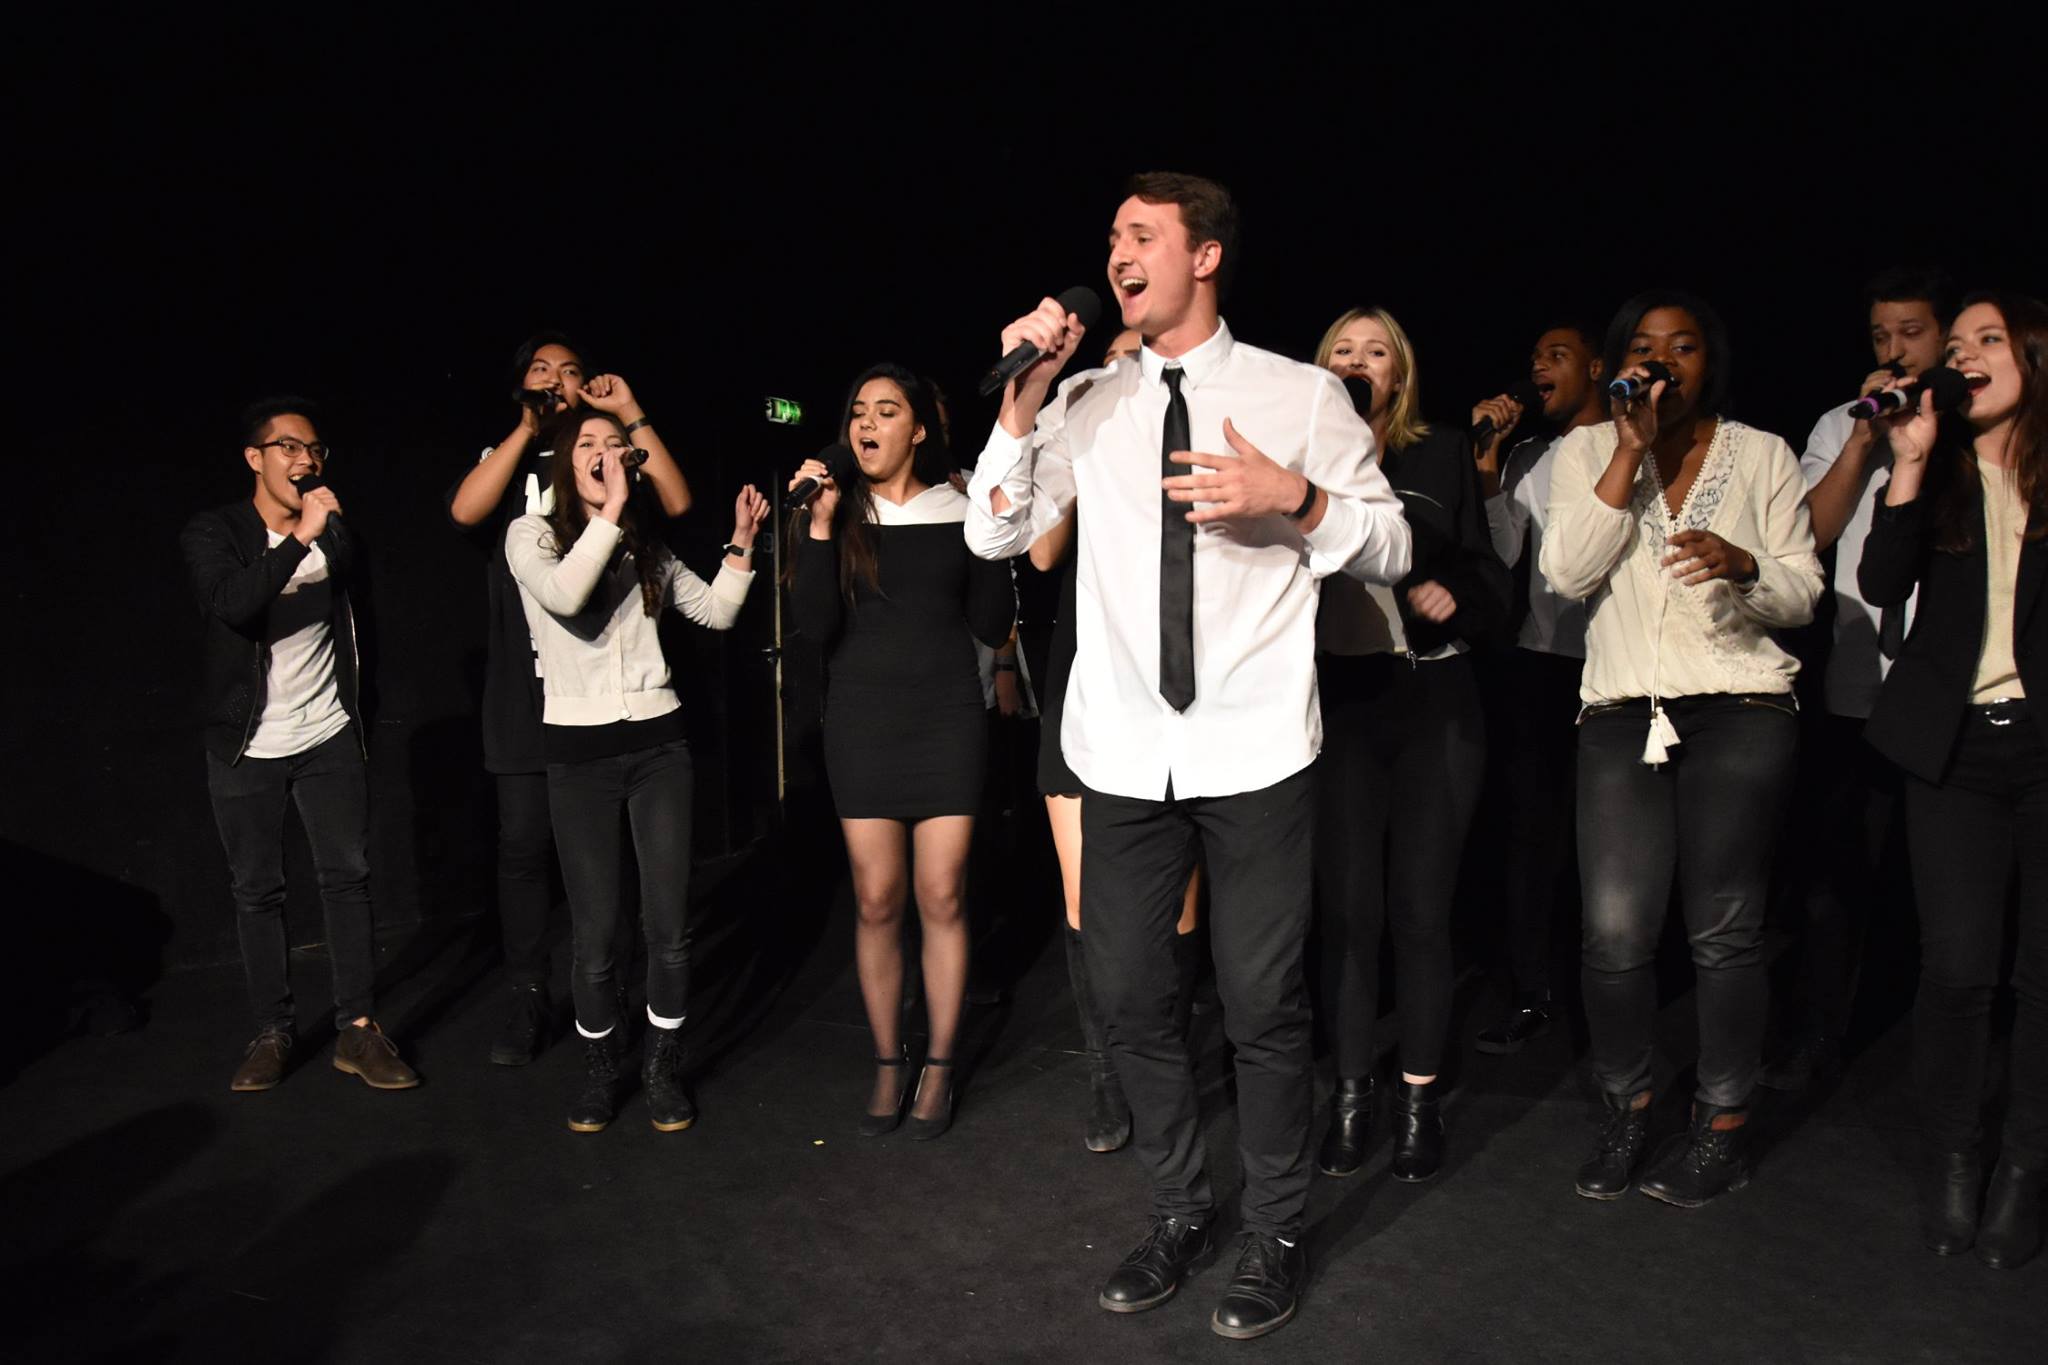 How To Start An Acapella Group In College